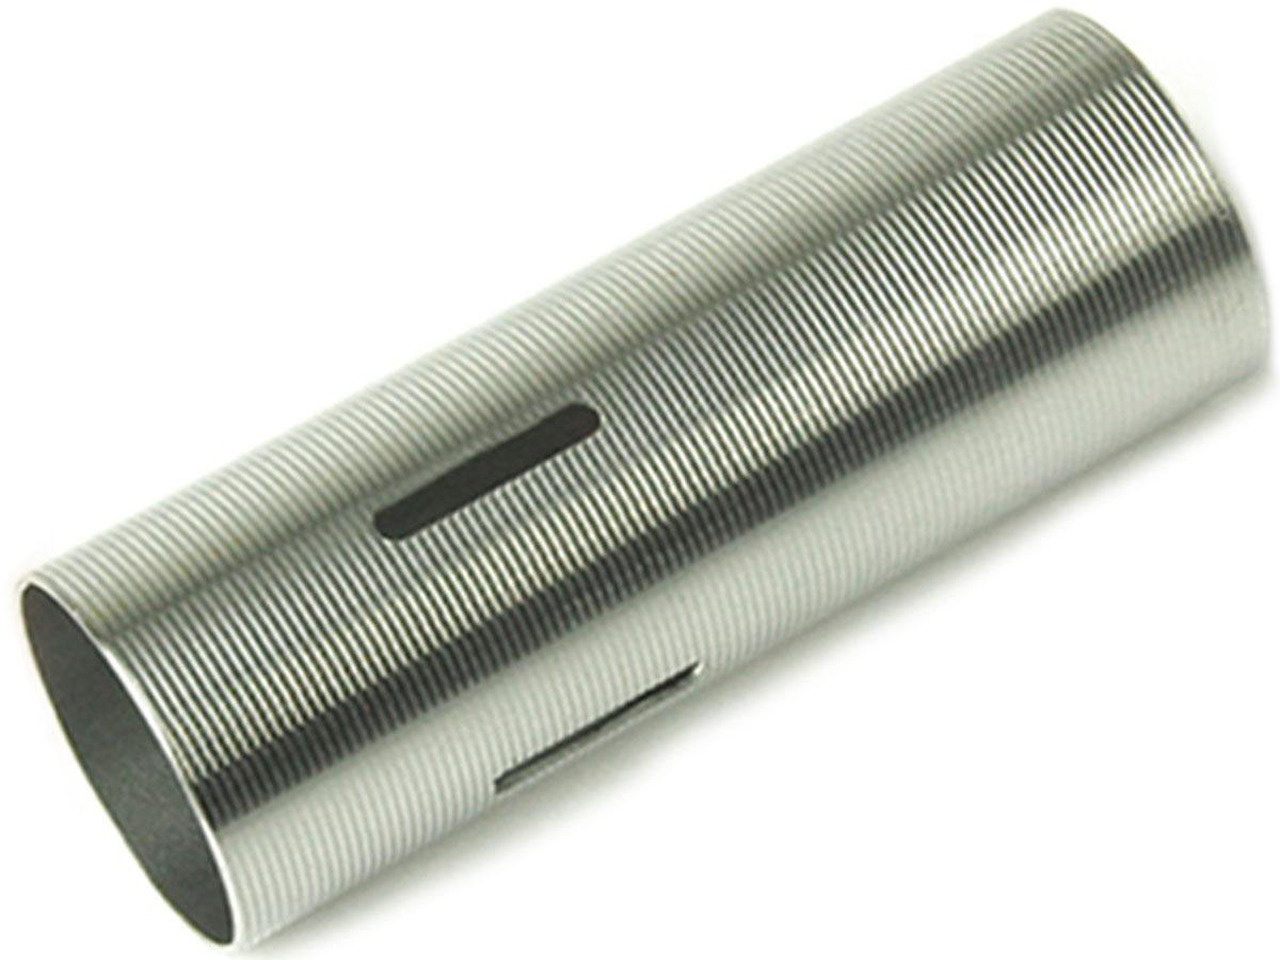 Laylax Laylax - Prometheus Stainless Hard Cylinder Type E 201 to 250 mm Barrel - G&G